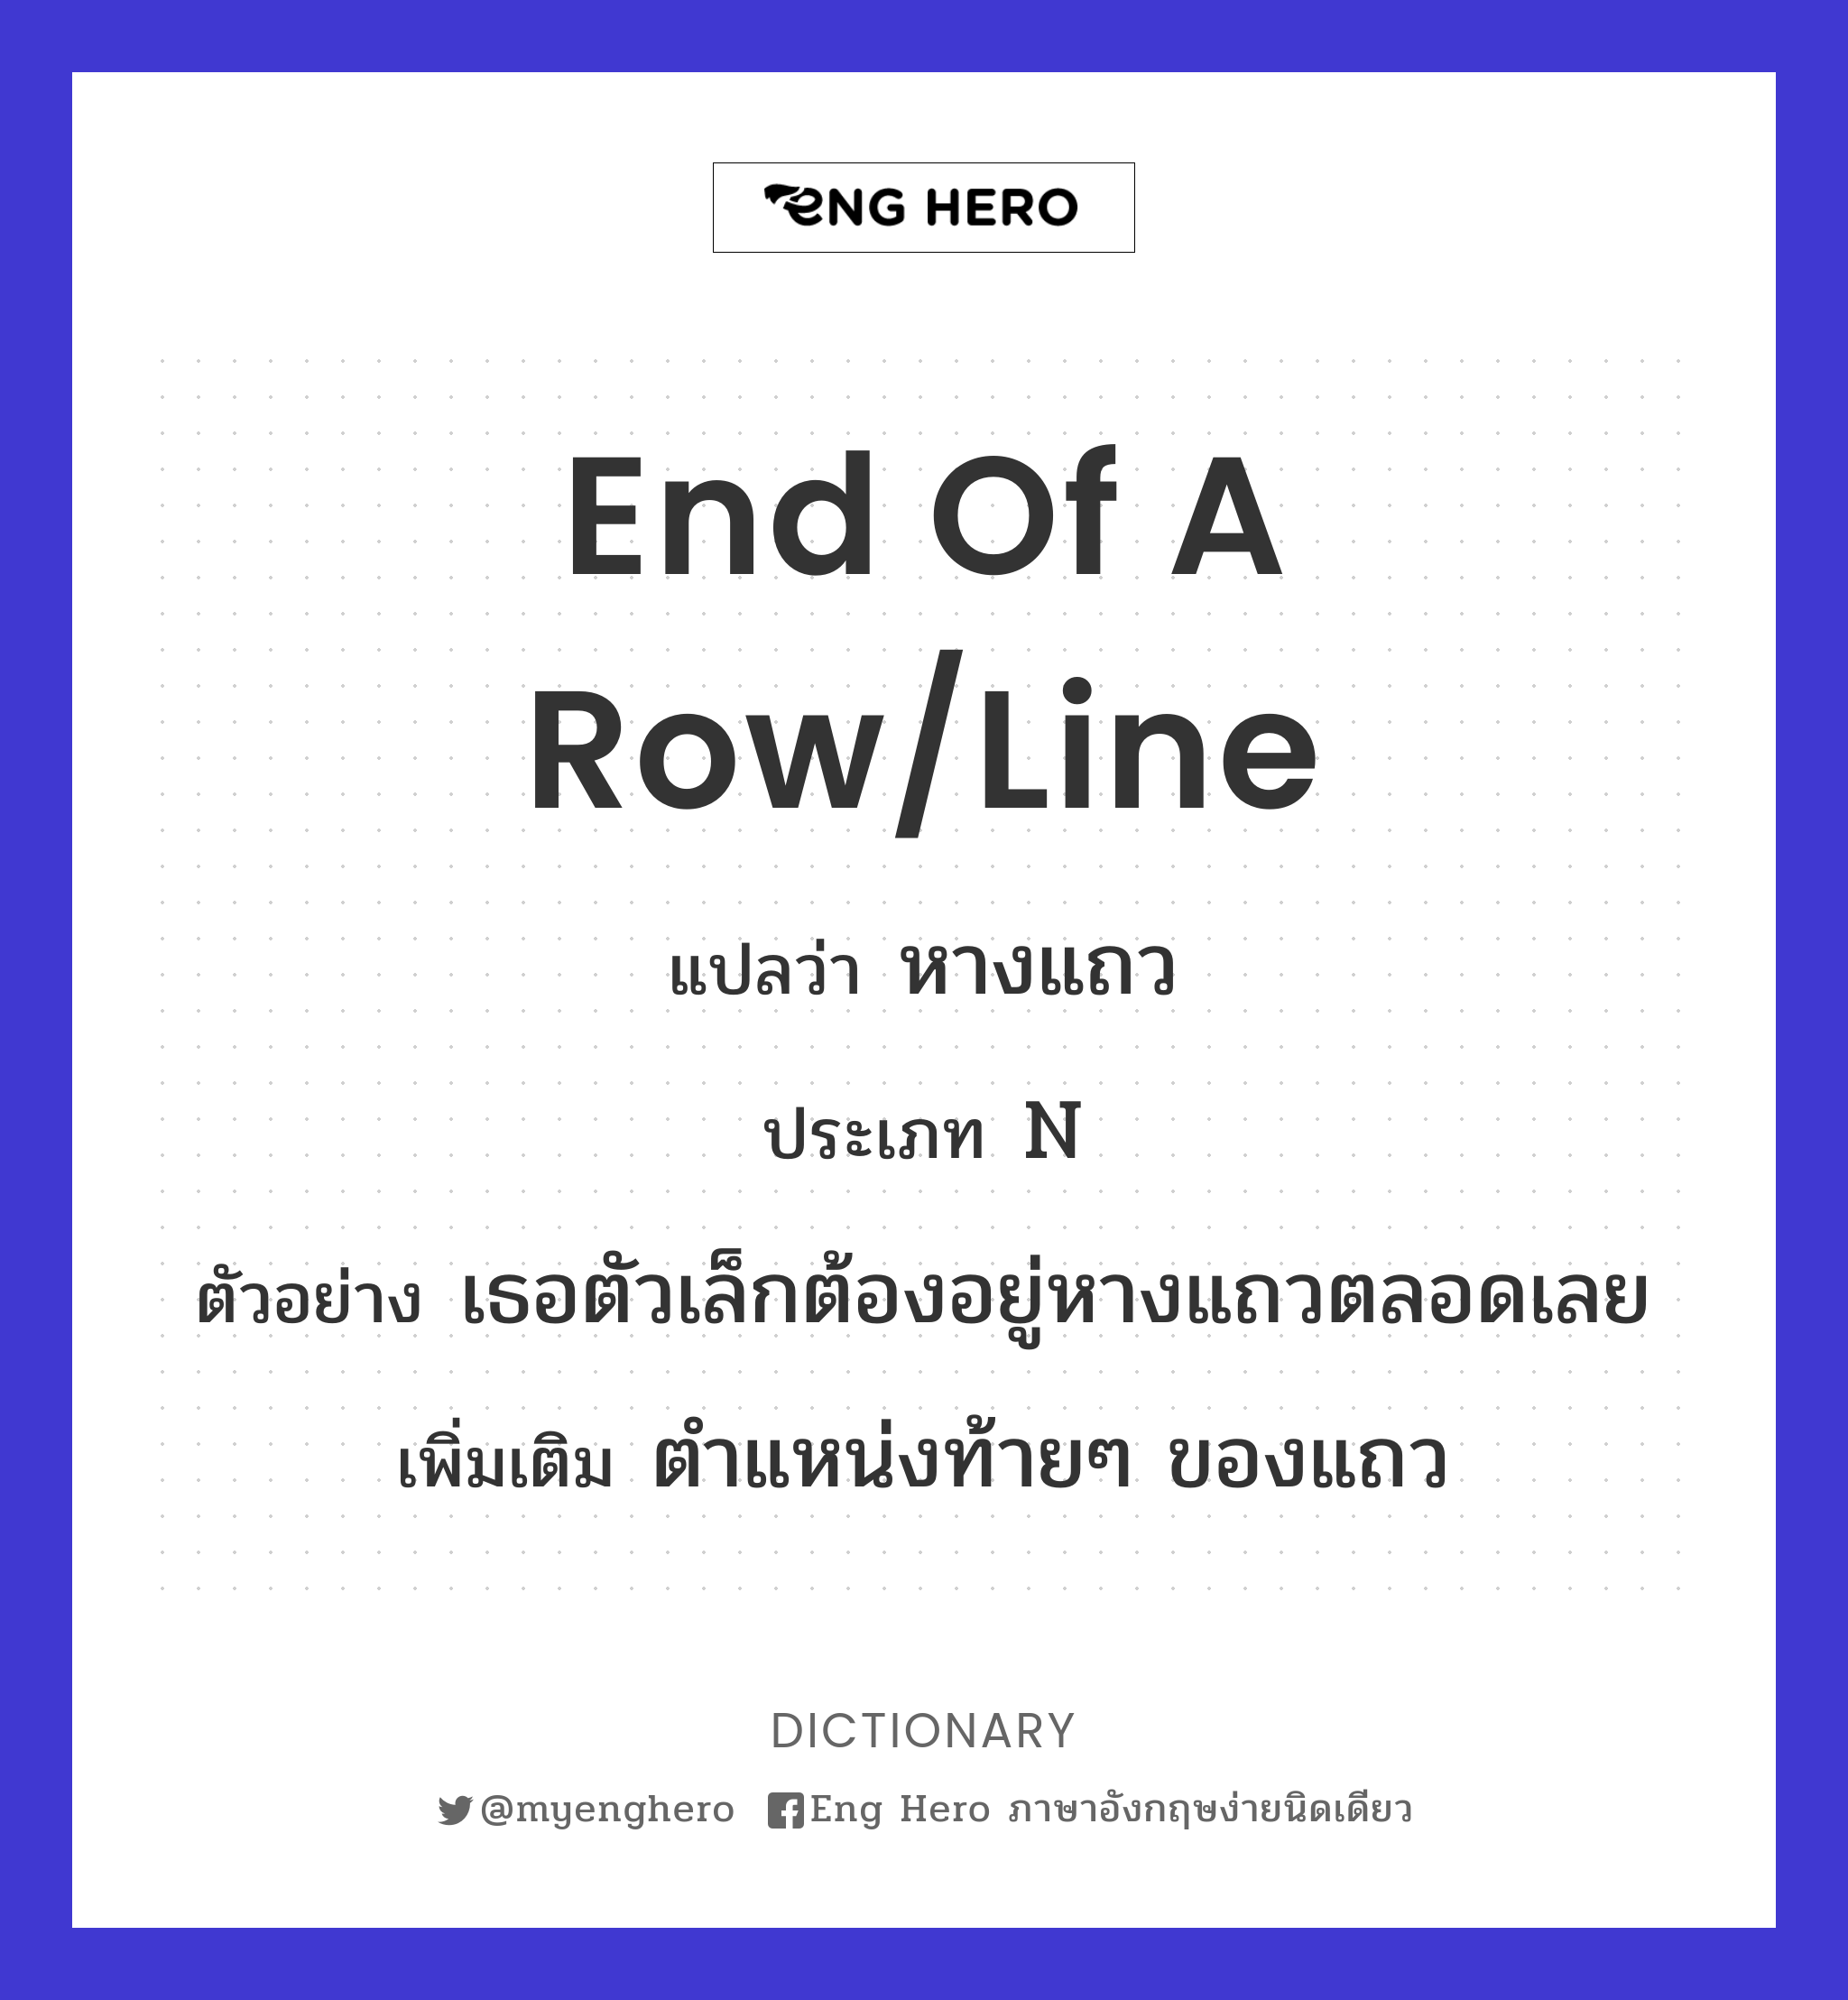 end of a row/line